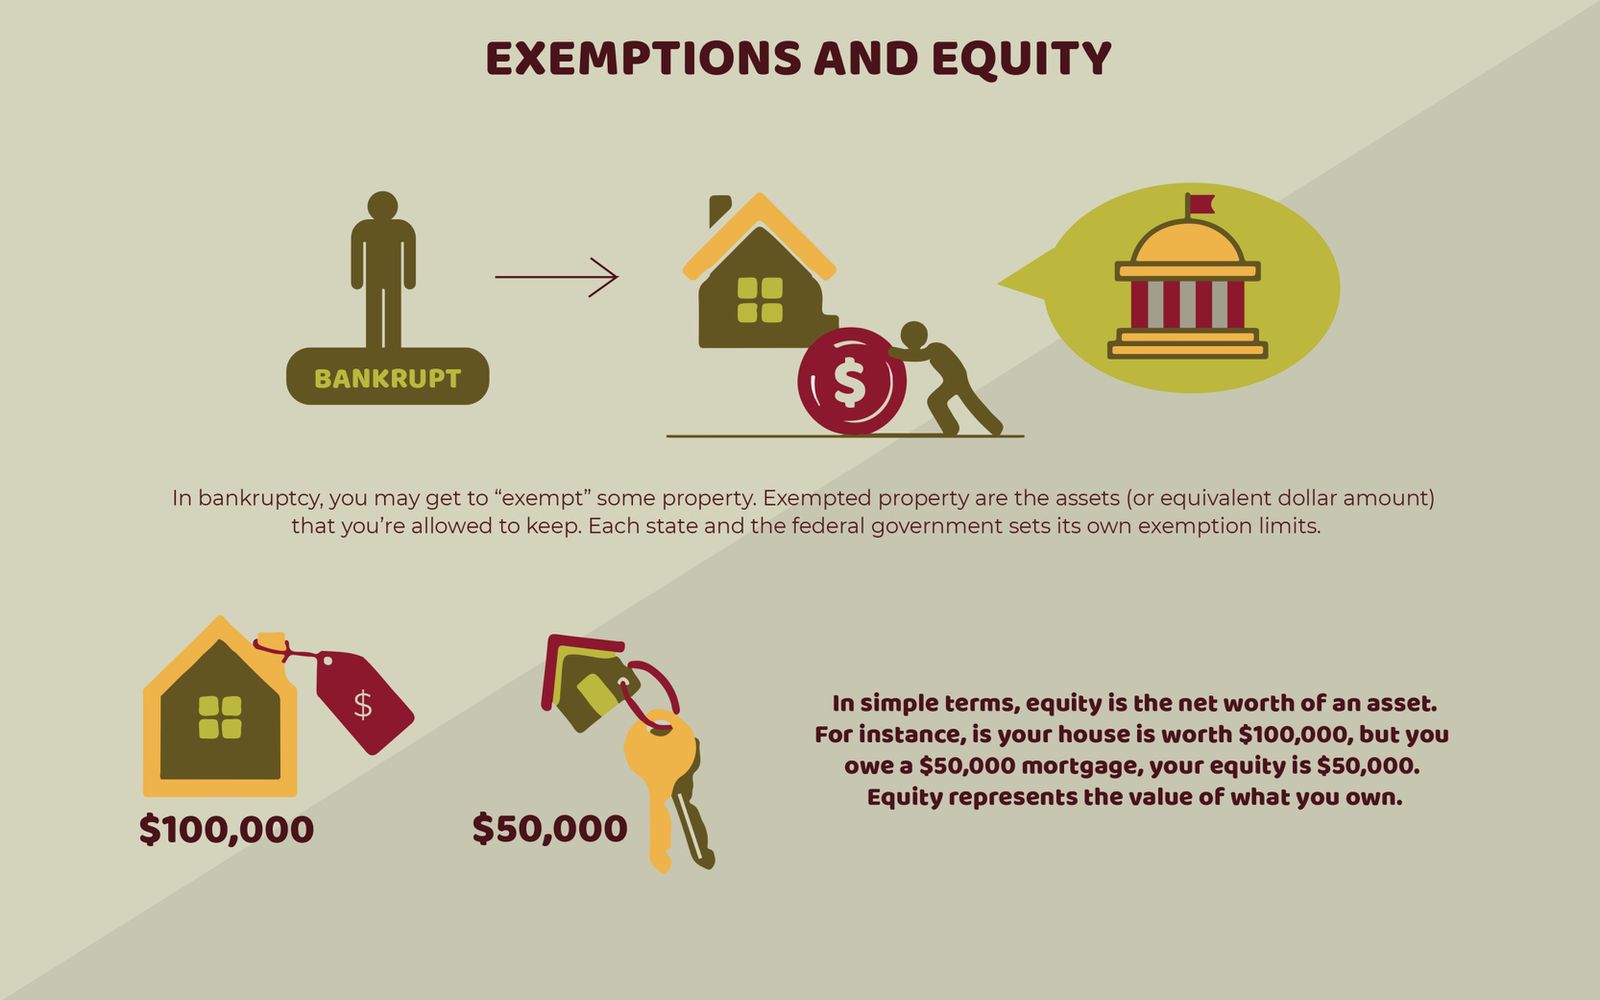 Exemptions and Equity